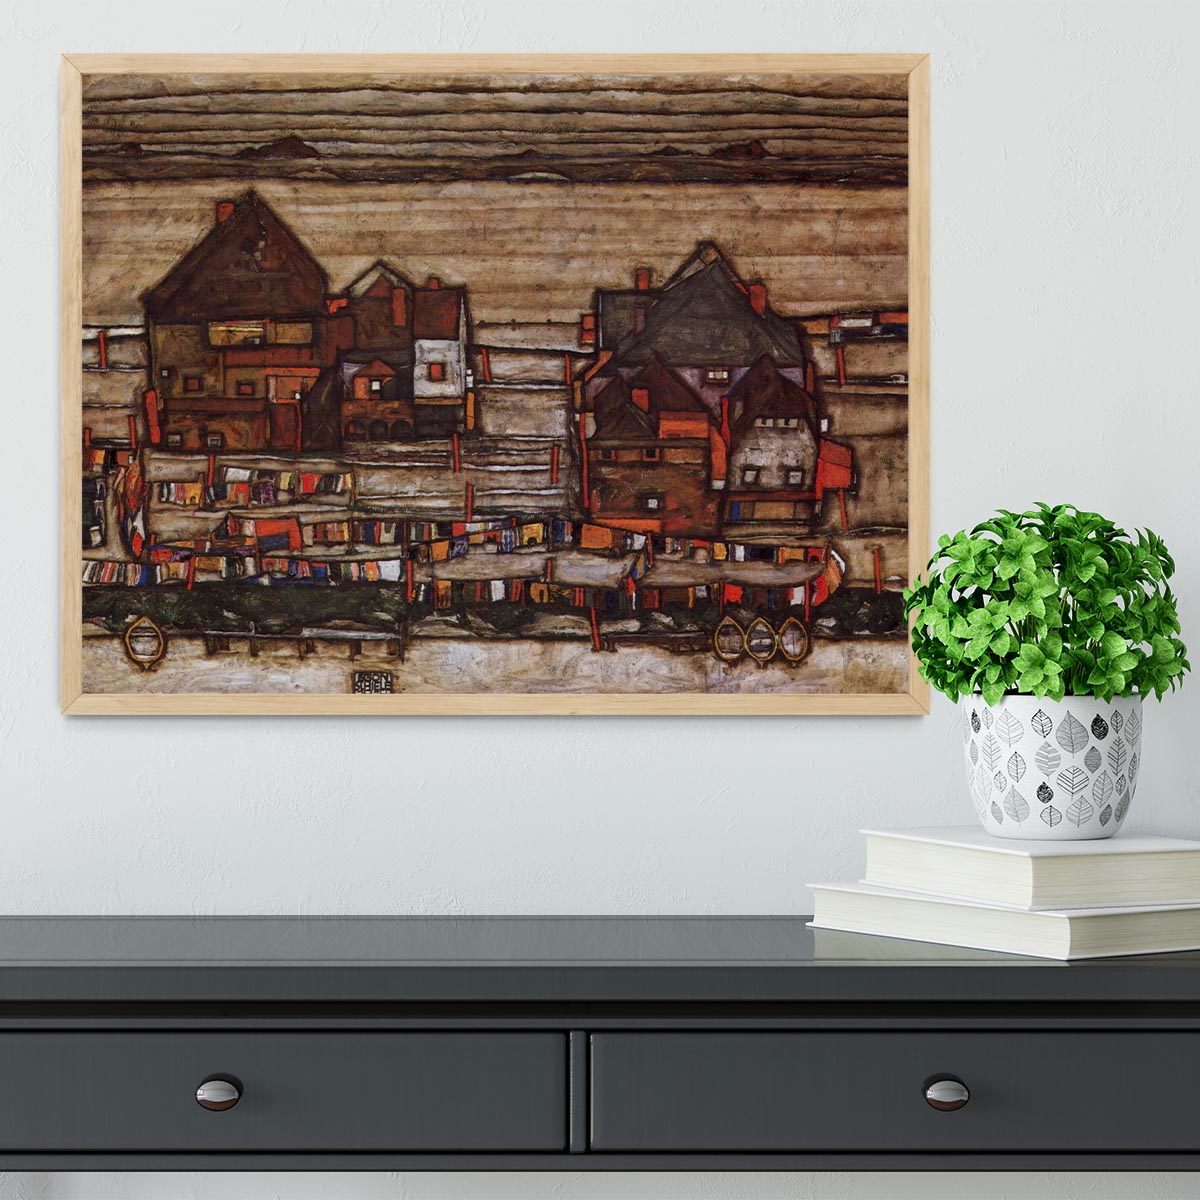 Houses with laundry lines and suburban by Egon Schiele Framed Print - Canvas Art Rocks - 4